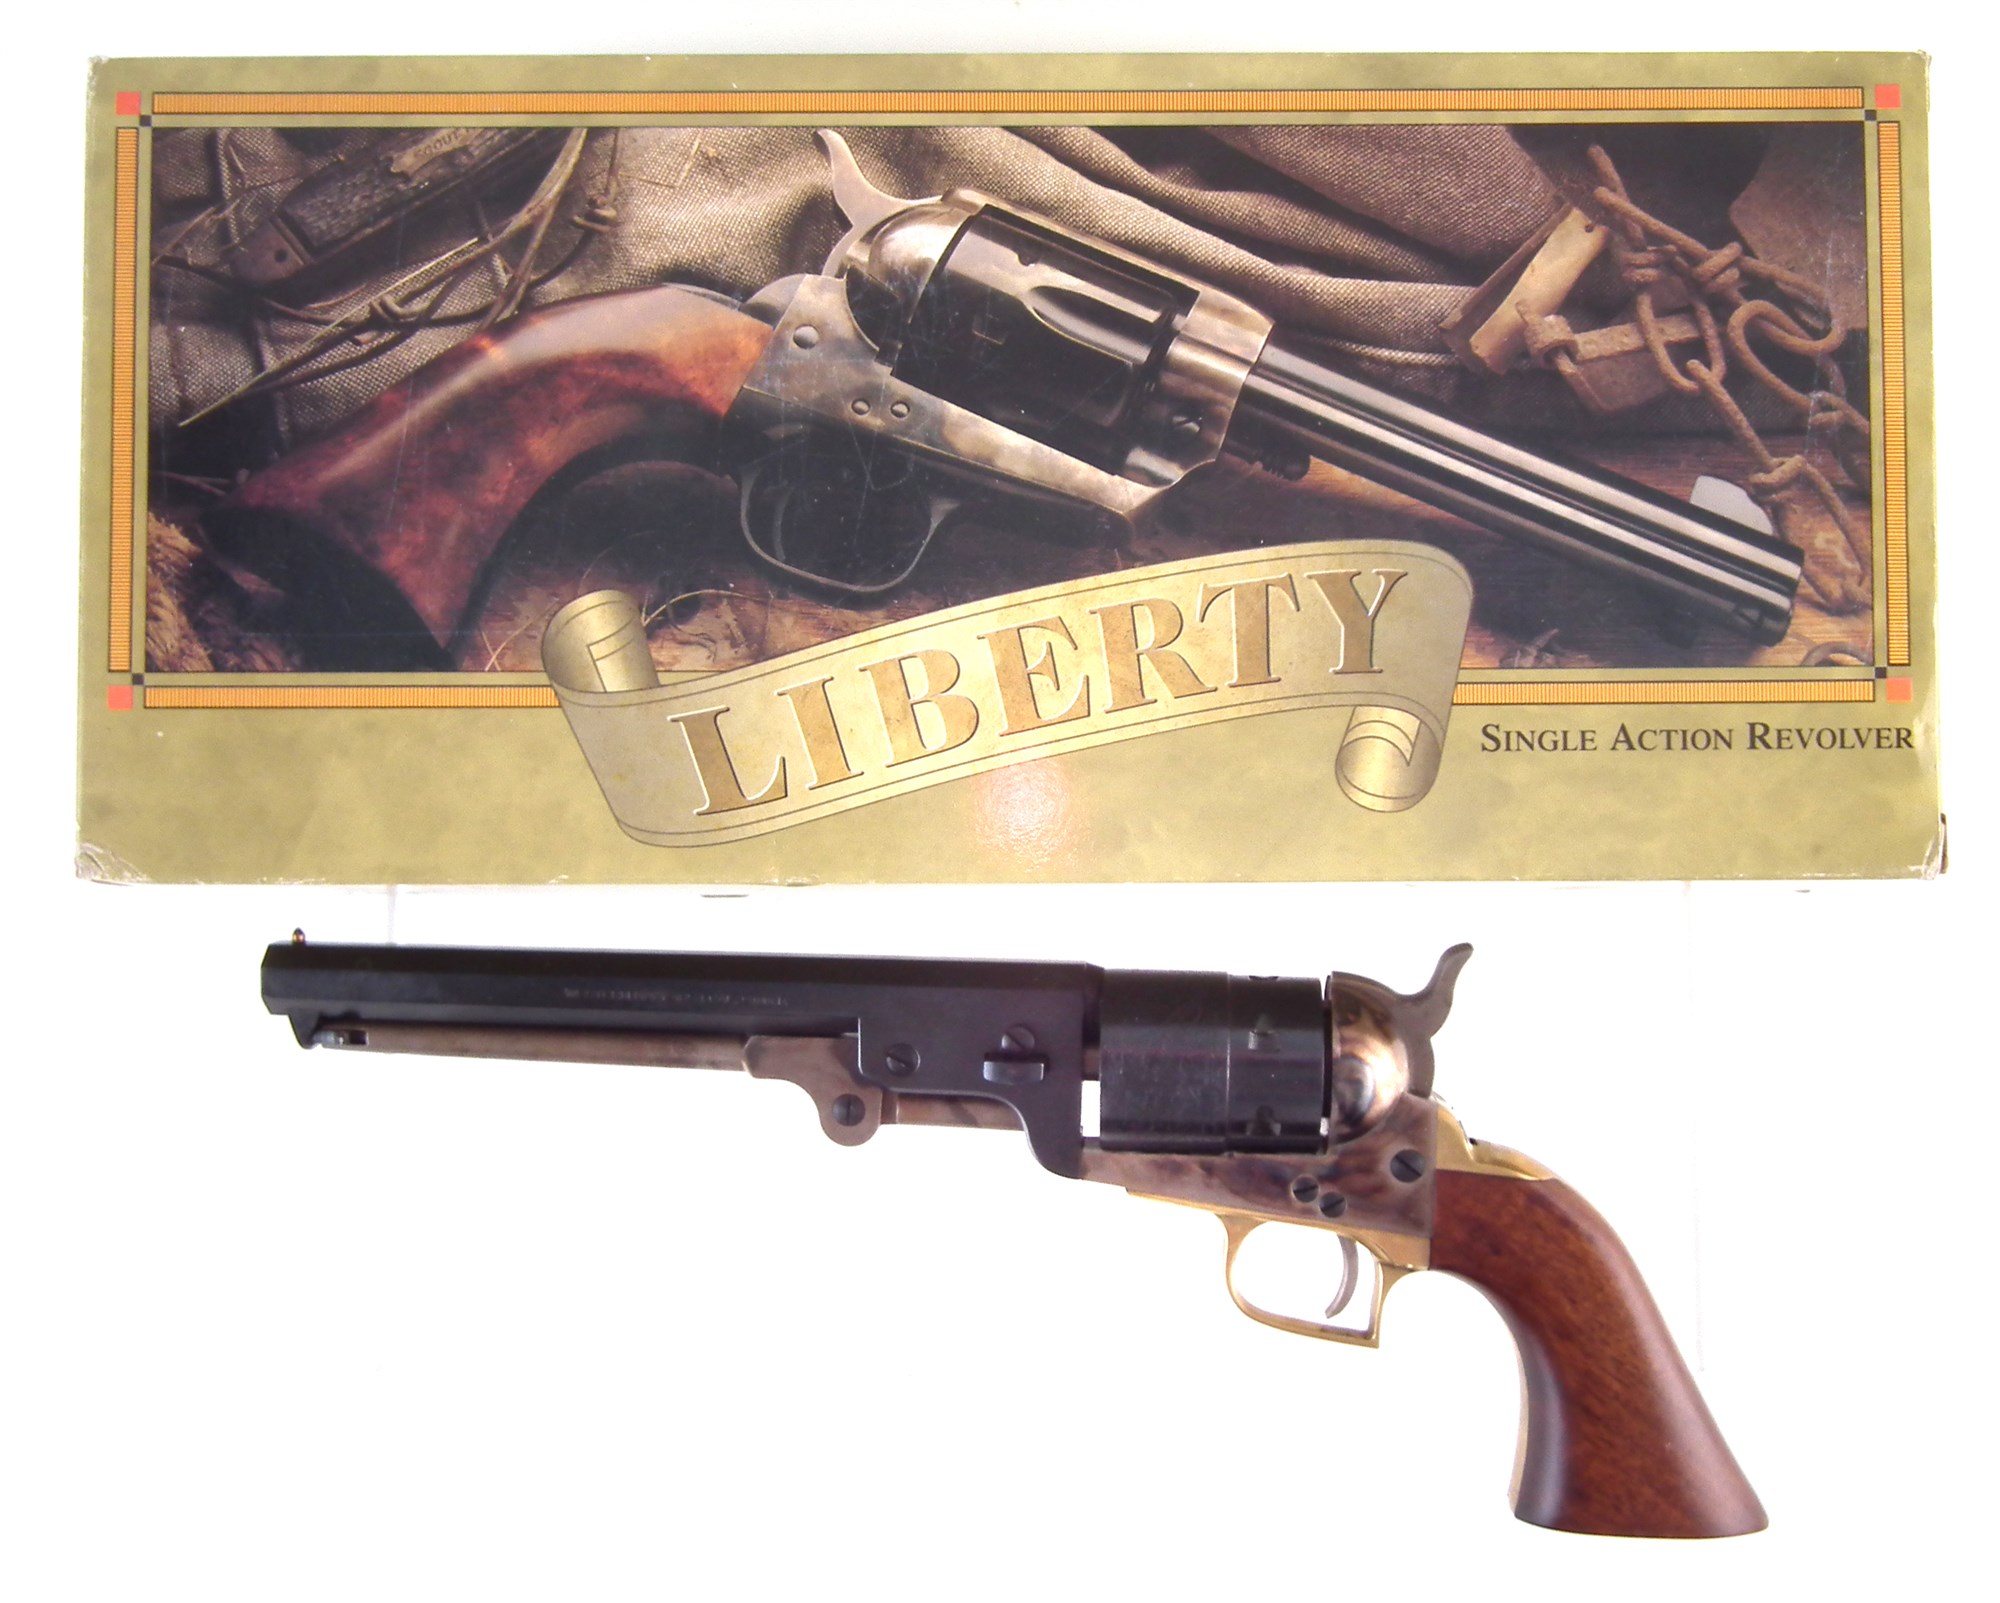 Pietta Western 1851 Navy 9mm blank fire revolver,  with square back trigger guard, miss matching